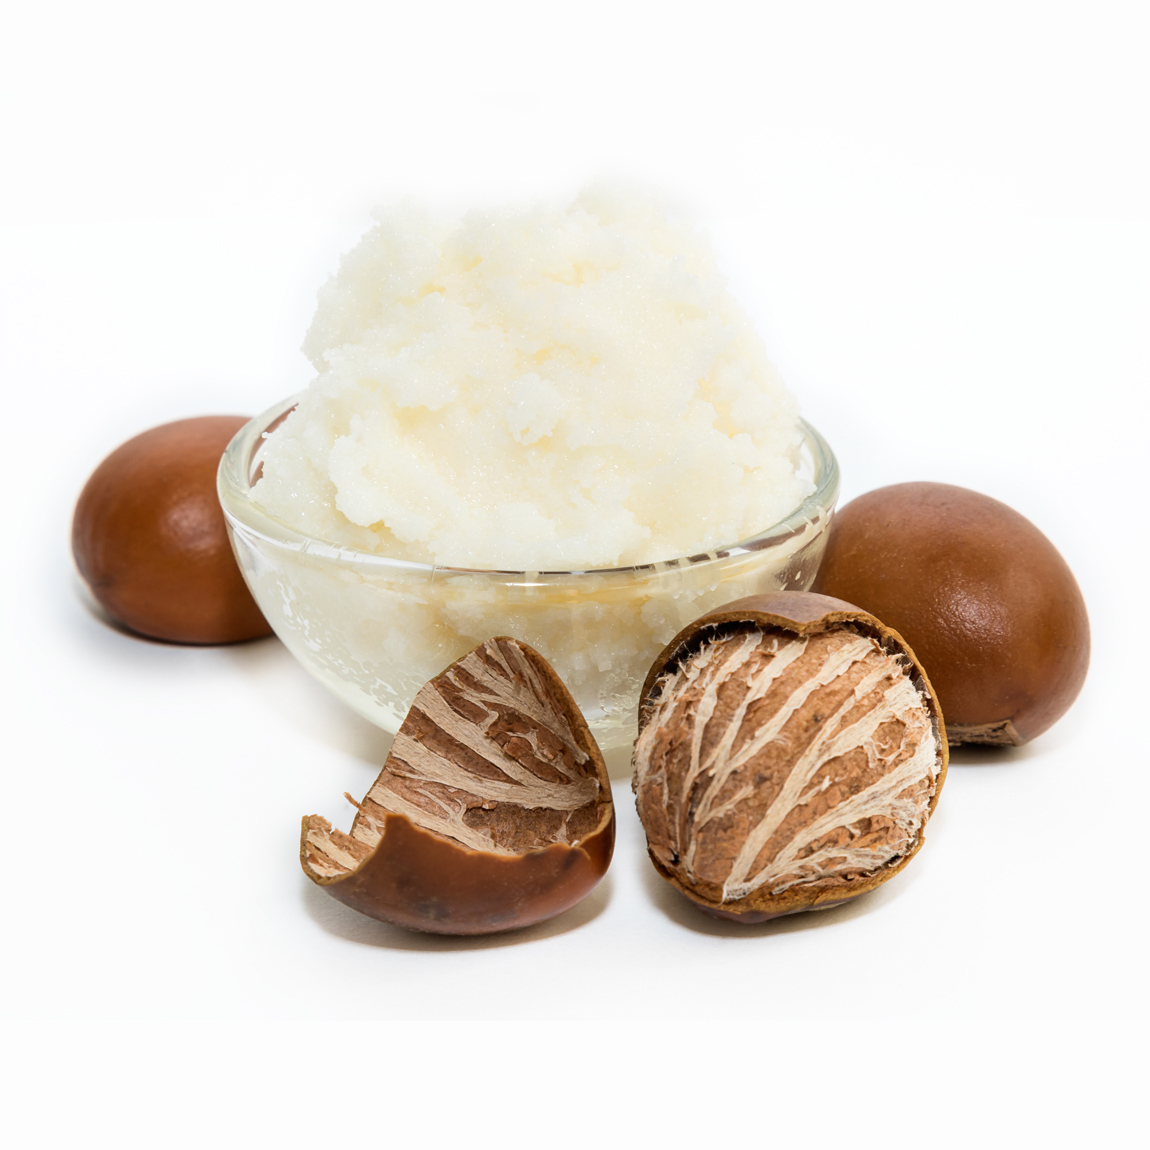 Shea Butter. Find out why it is so famous and appreciated in cosmetics.